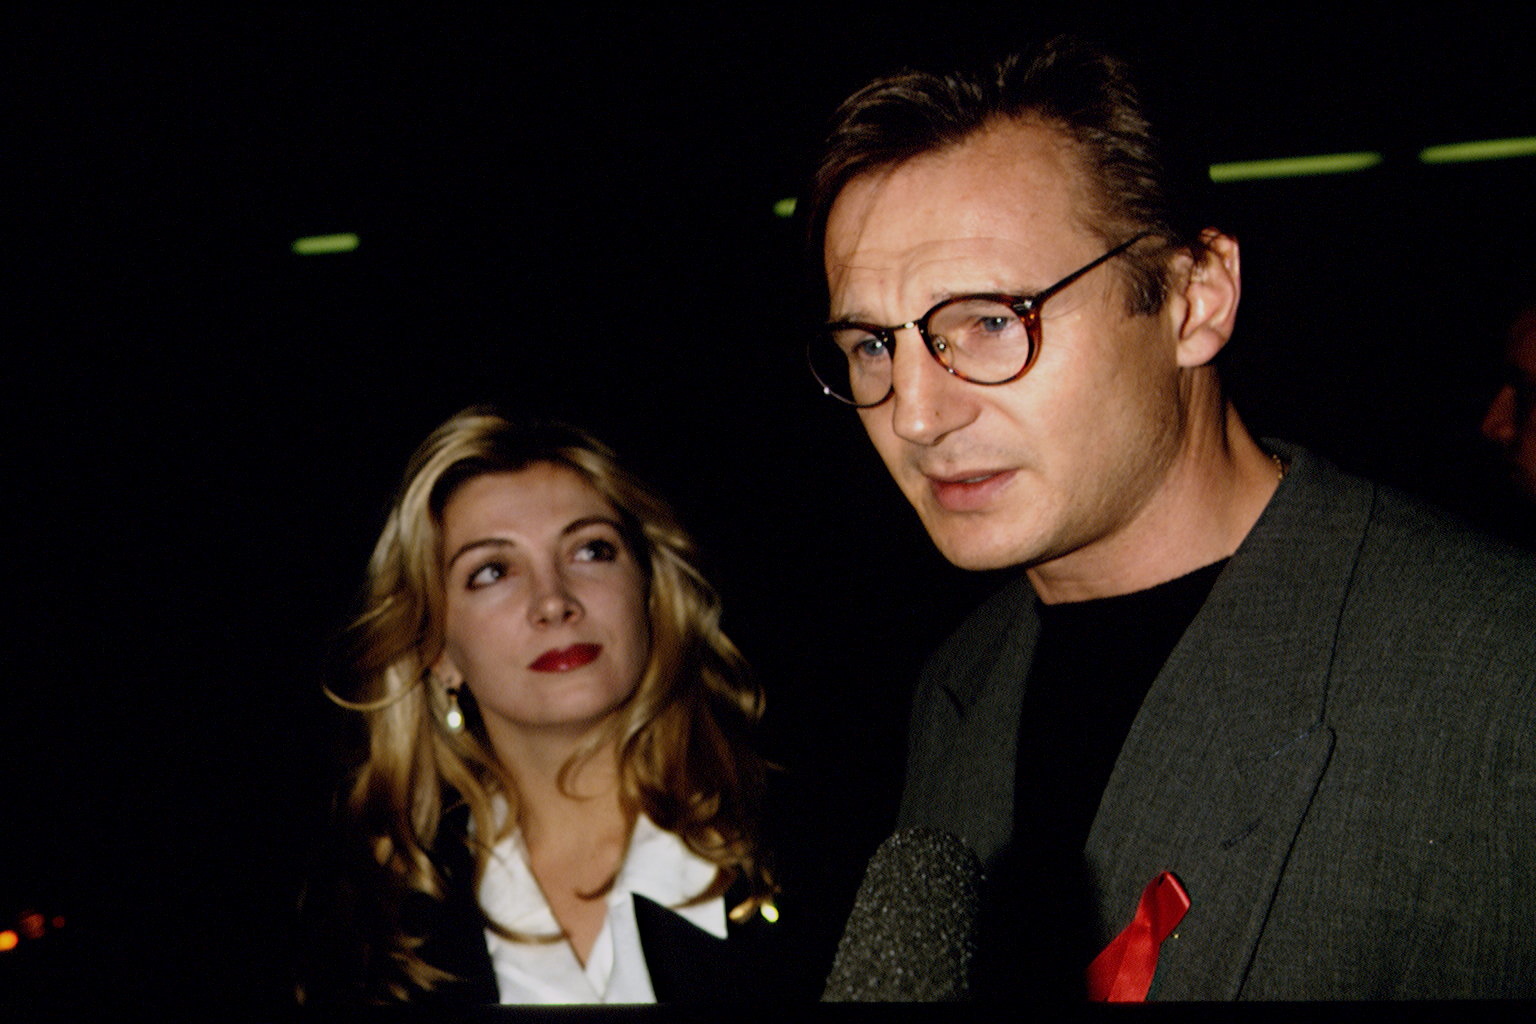 Natasha Richardson and Liam Neeson at the premiere of "Schindler's List" in 1993. | Source: Getty Images